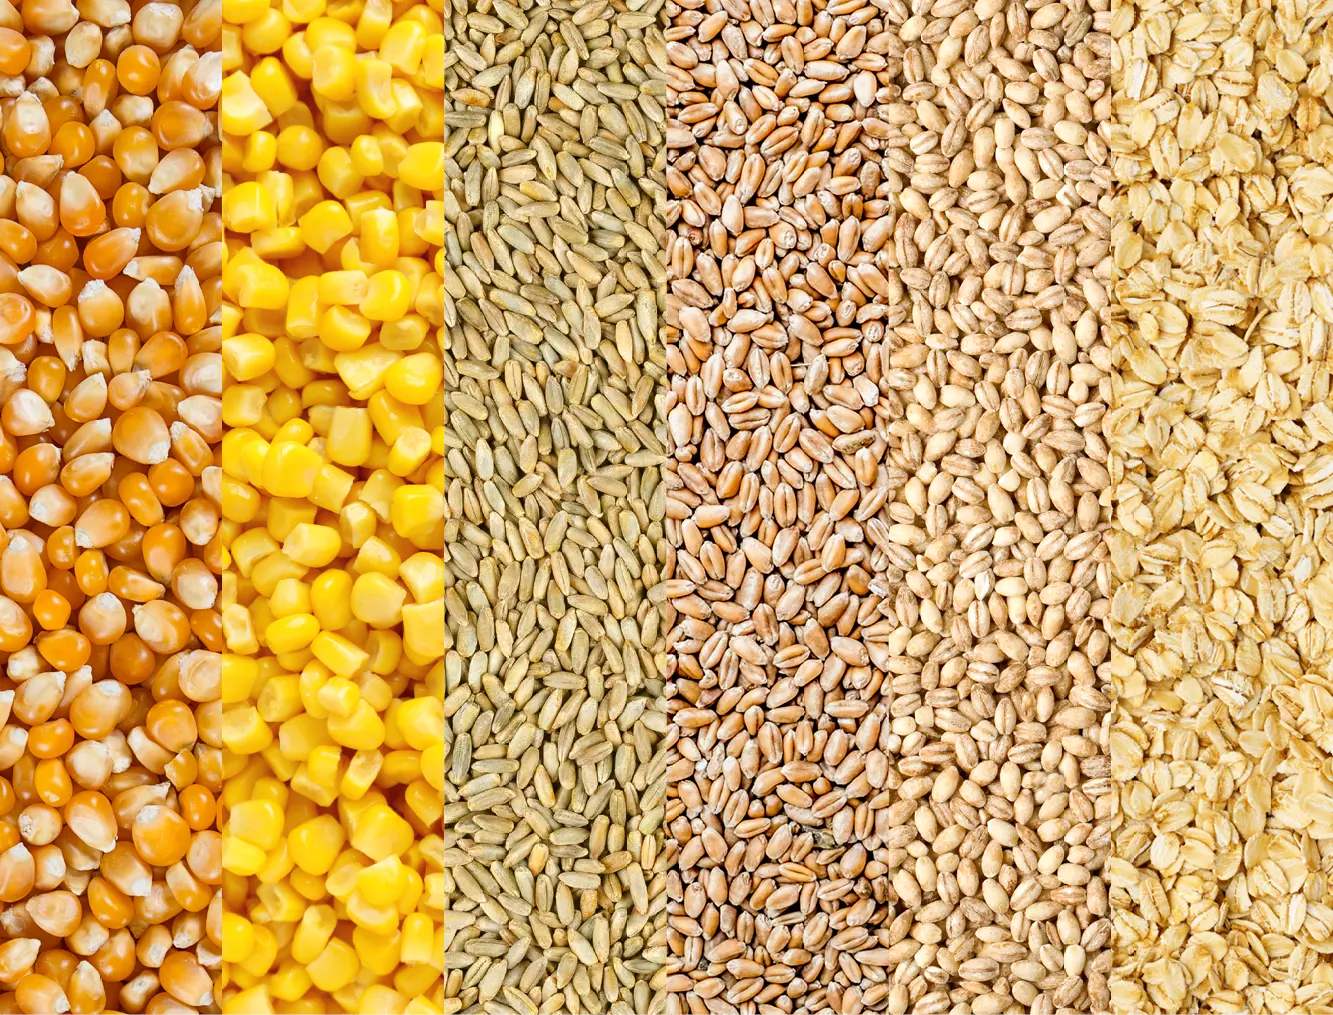 Process all types of grains at low cost such as: dry or wet corn, rye, wheat, barley, and oats